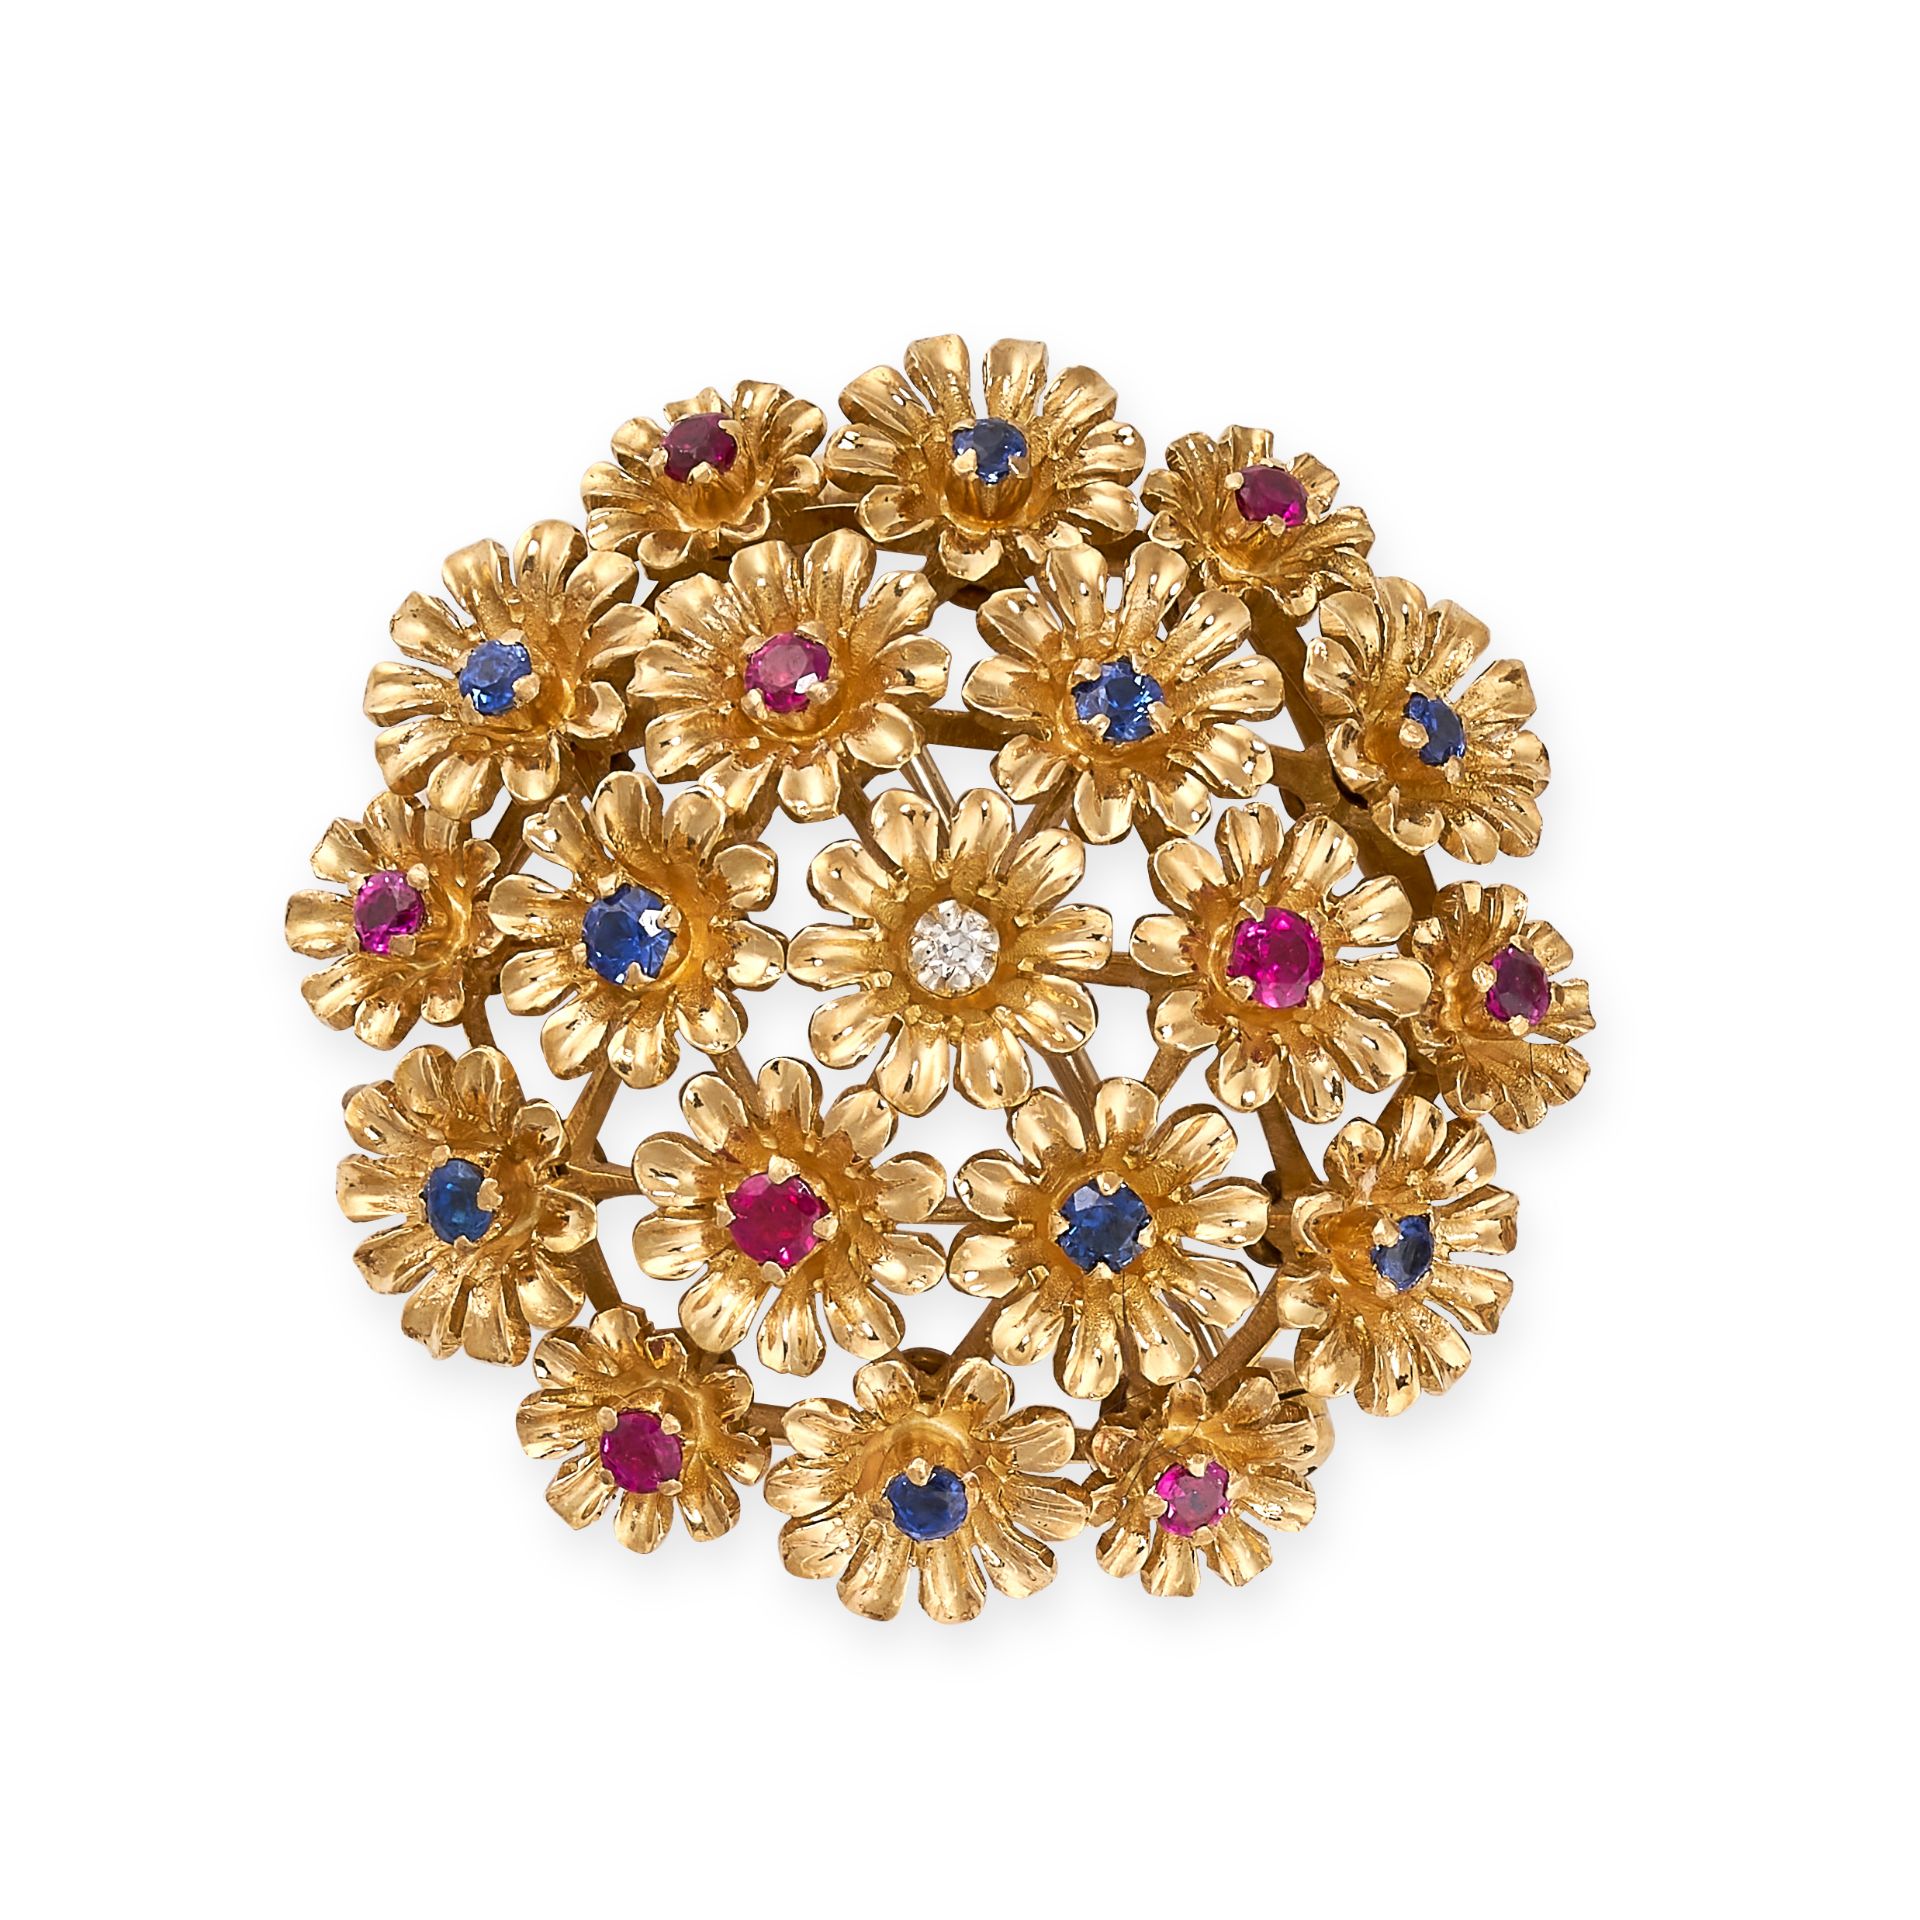 A VINTAGE RUBY, SAPPHIRE AND DIAMOND BROOCH in 18ct yellow gold, the circular body with